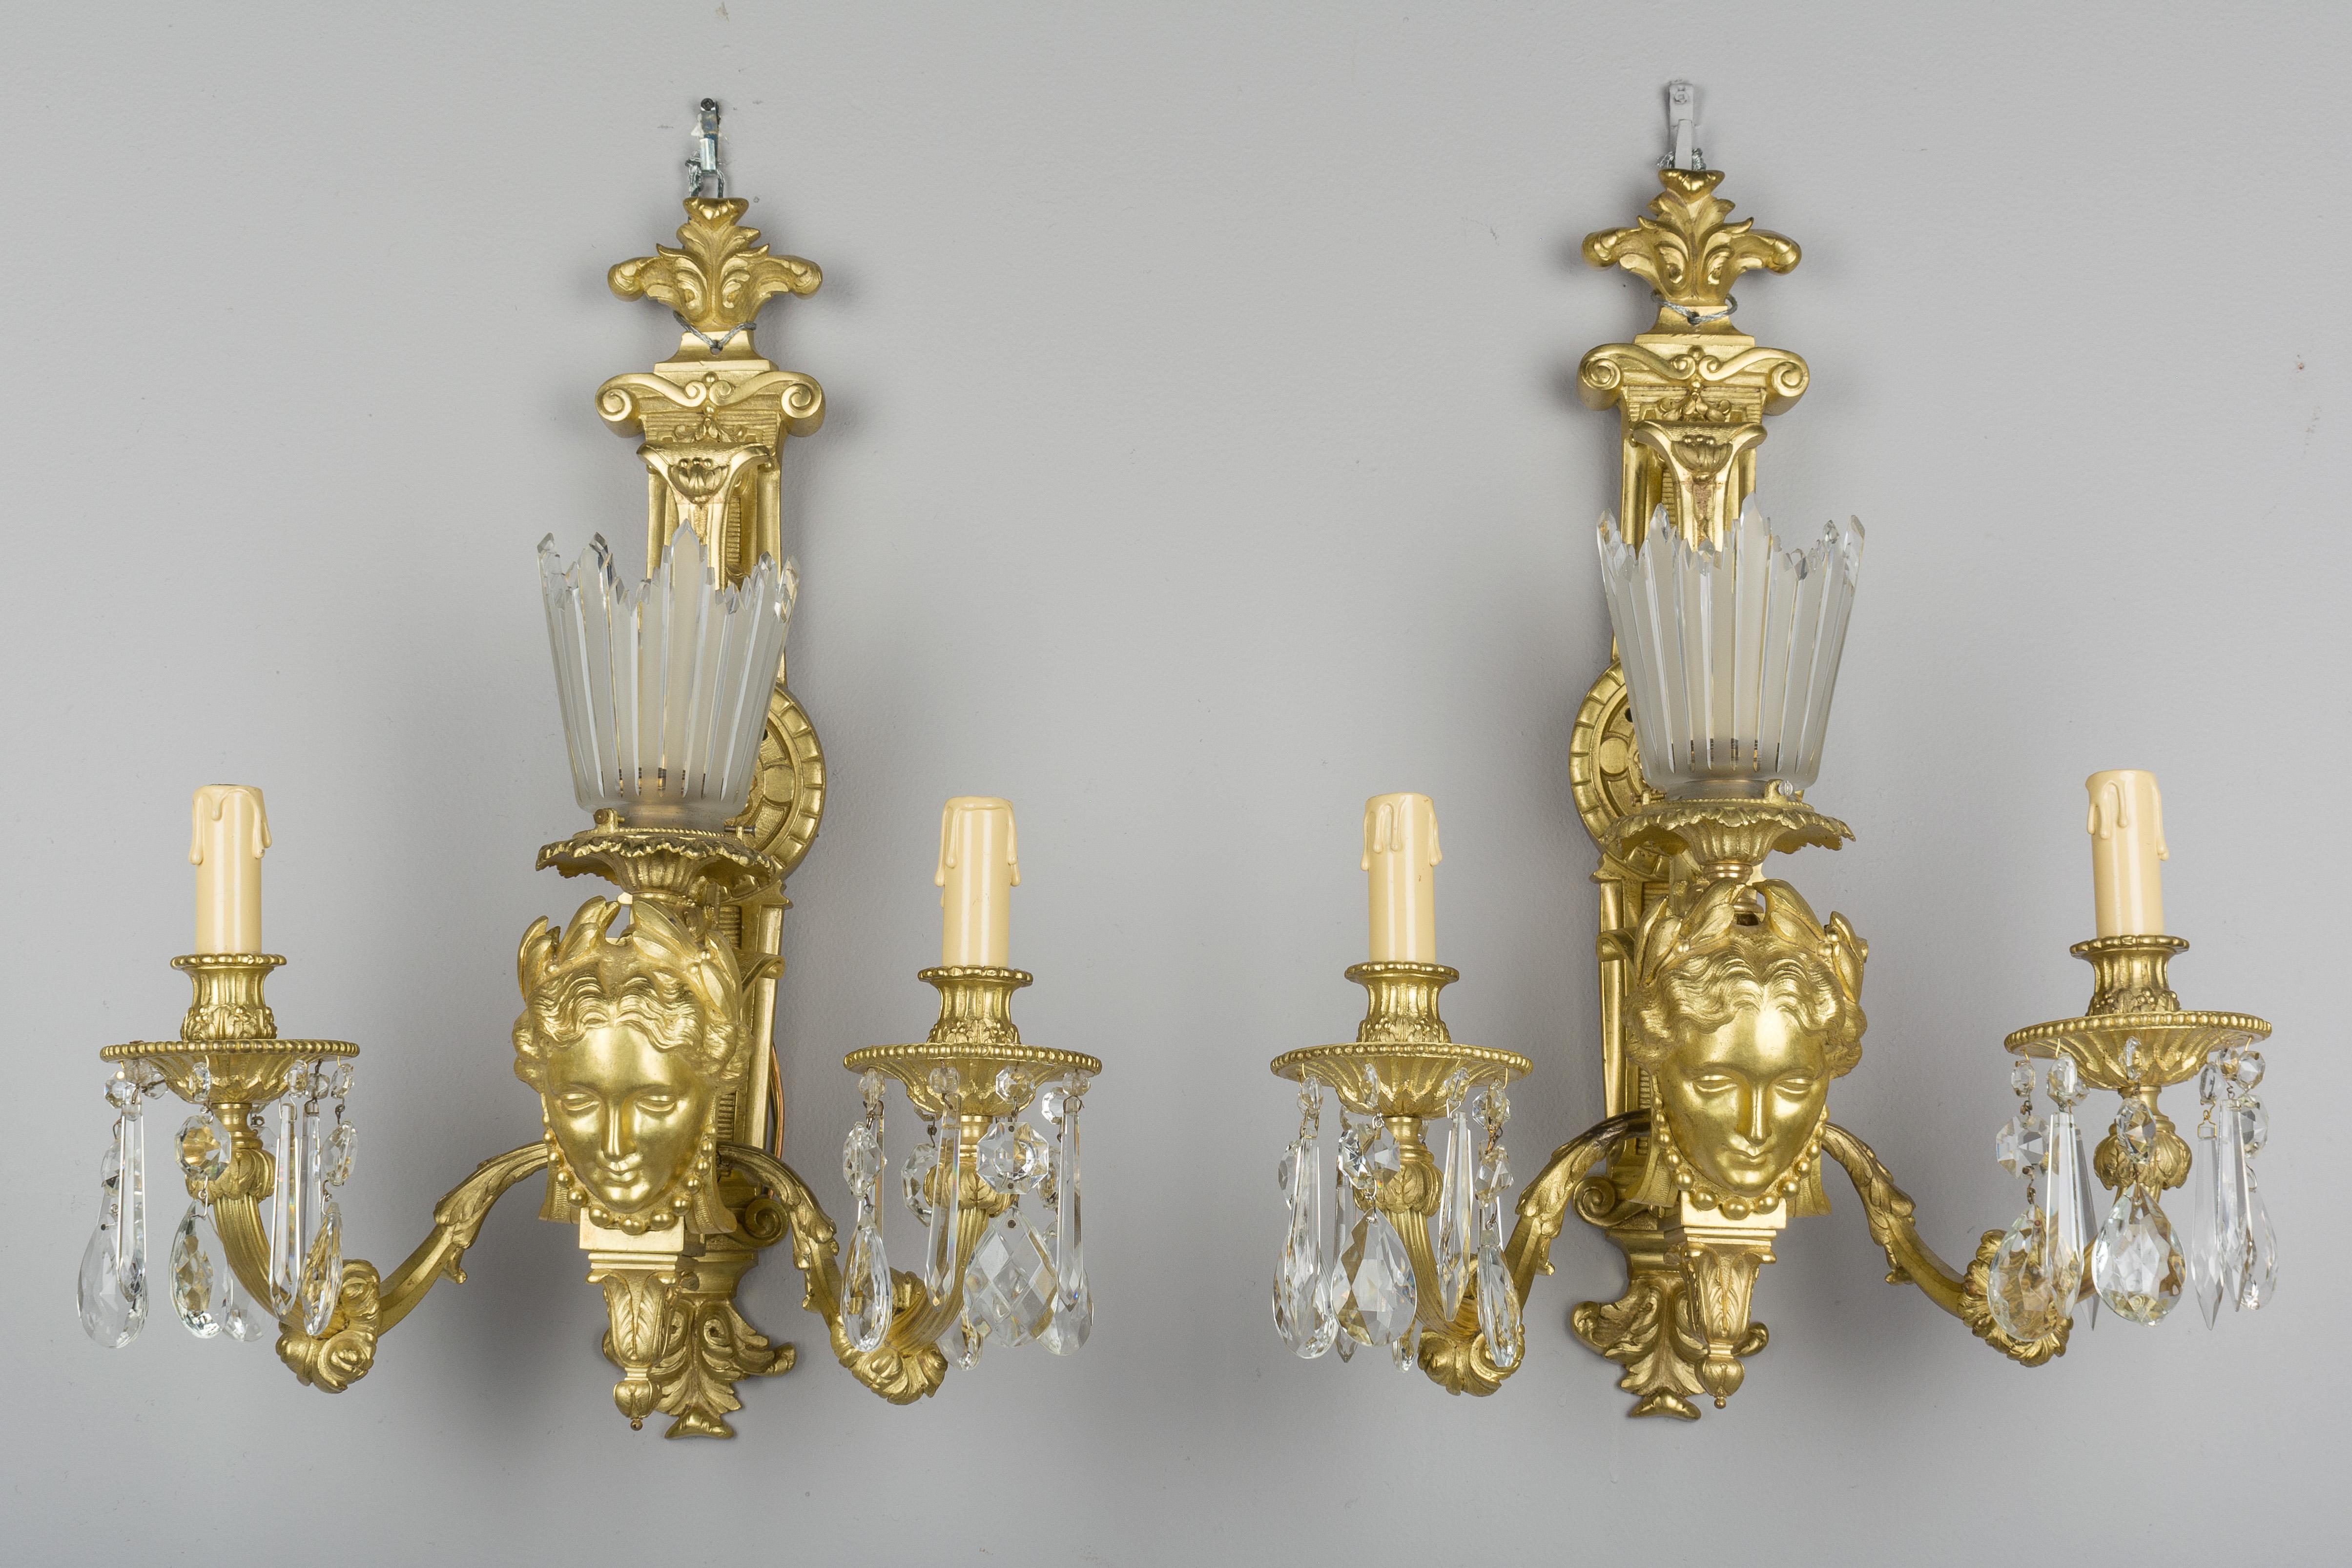 A pair of large heavy French gilt bronze three-light sconces, each with a classical woman's face below a crown-like frosted glass rayed shade and flanked by two candelabra with dripping crystal prisms. Fleur-de-lis bracket design. Fine quality